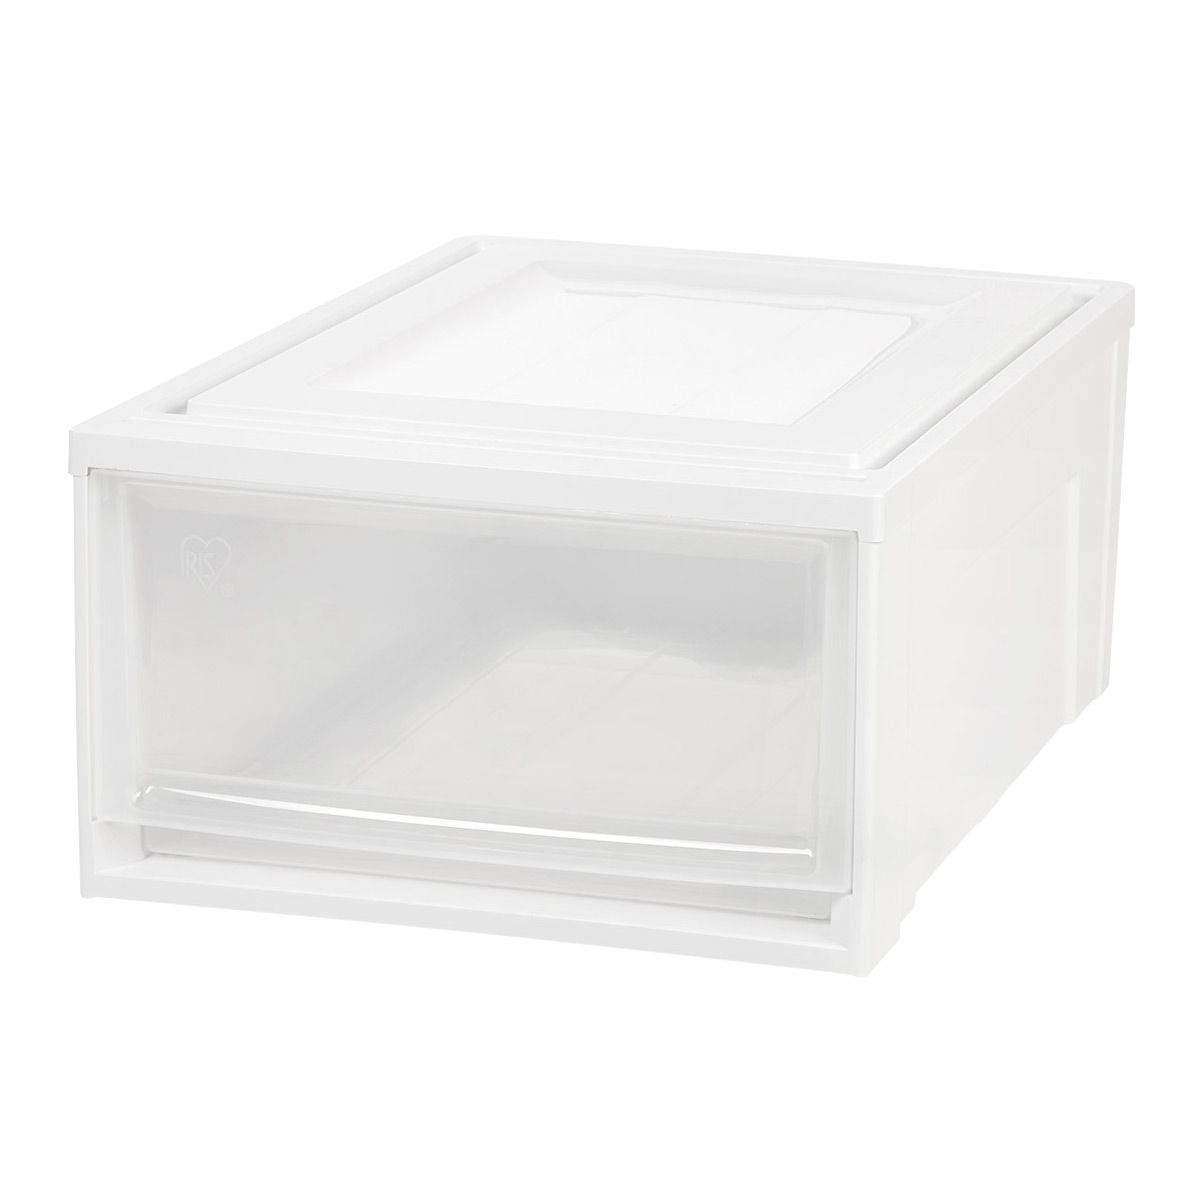 Modular Stacking Drawers | The Container Store